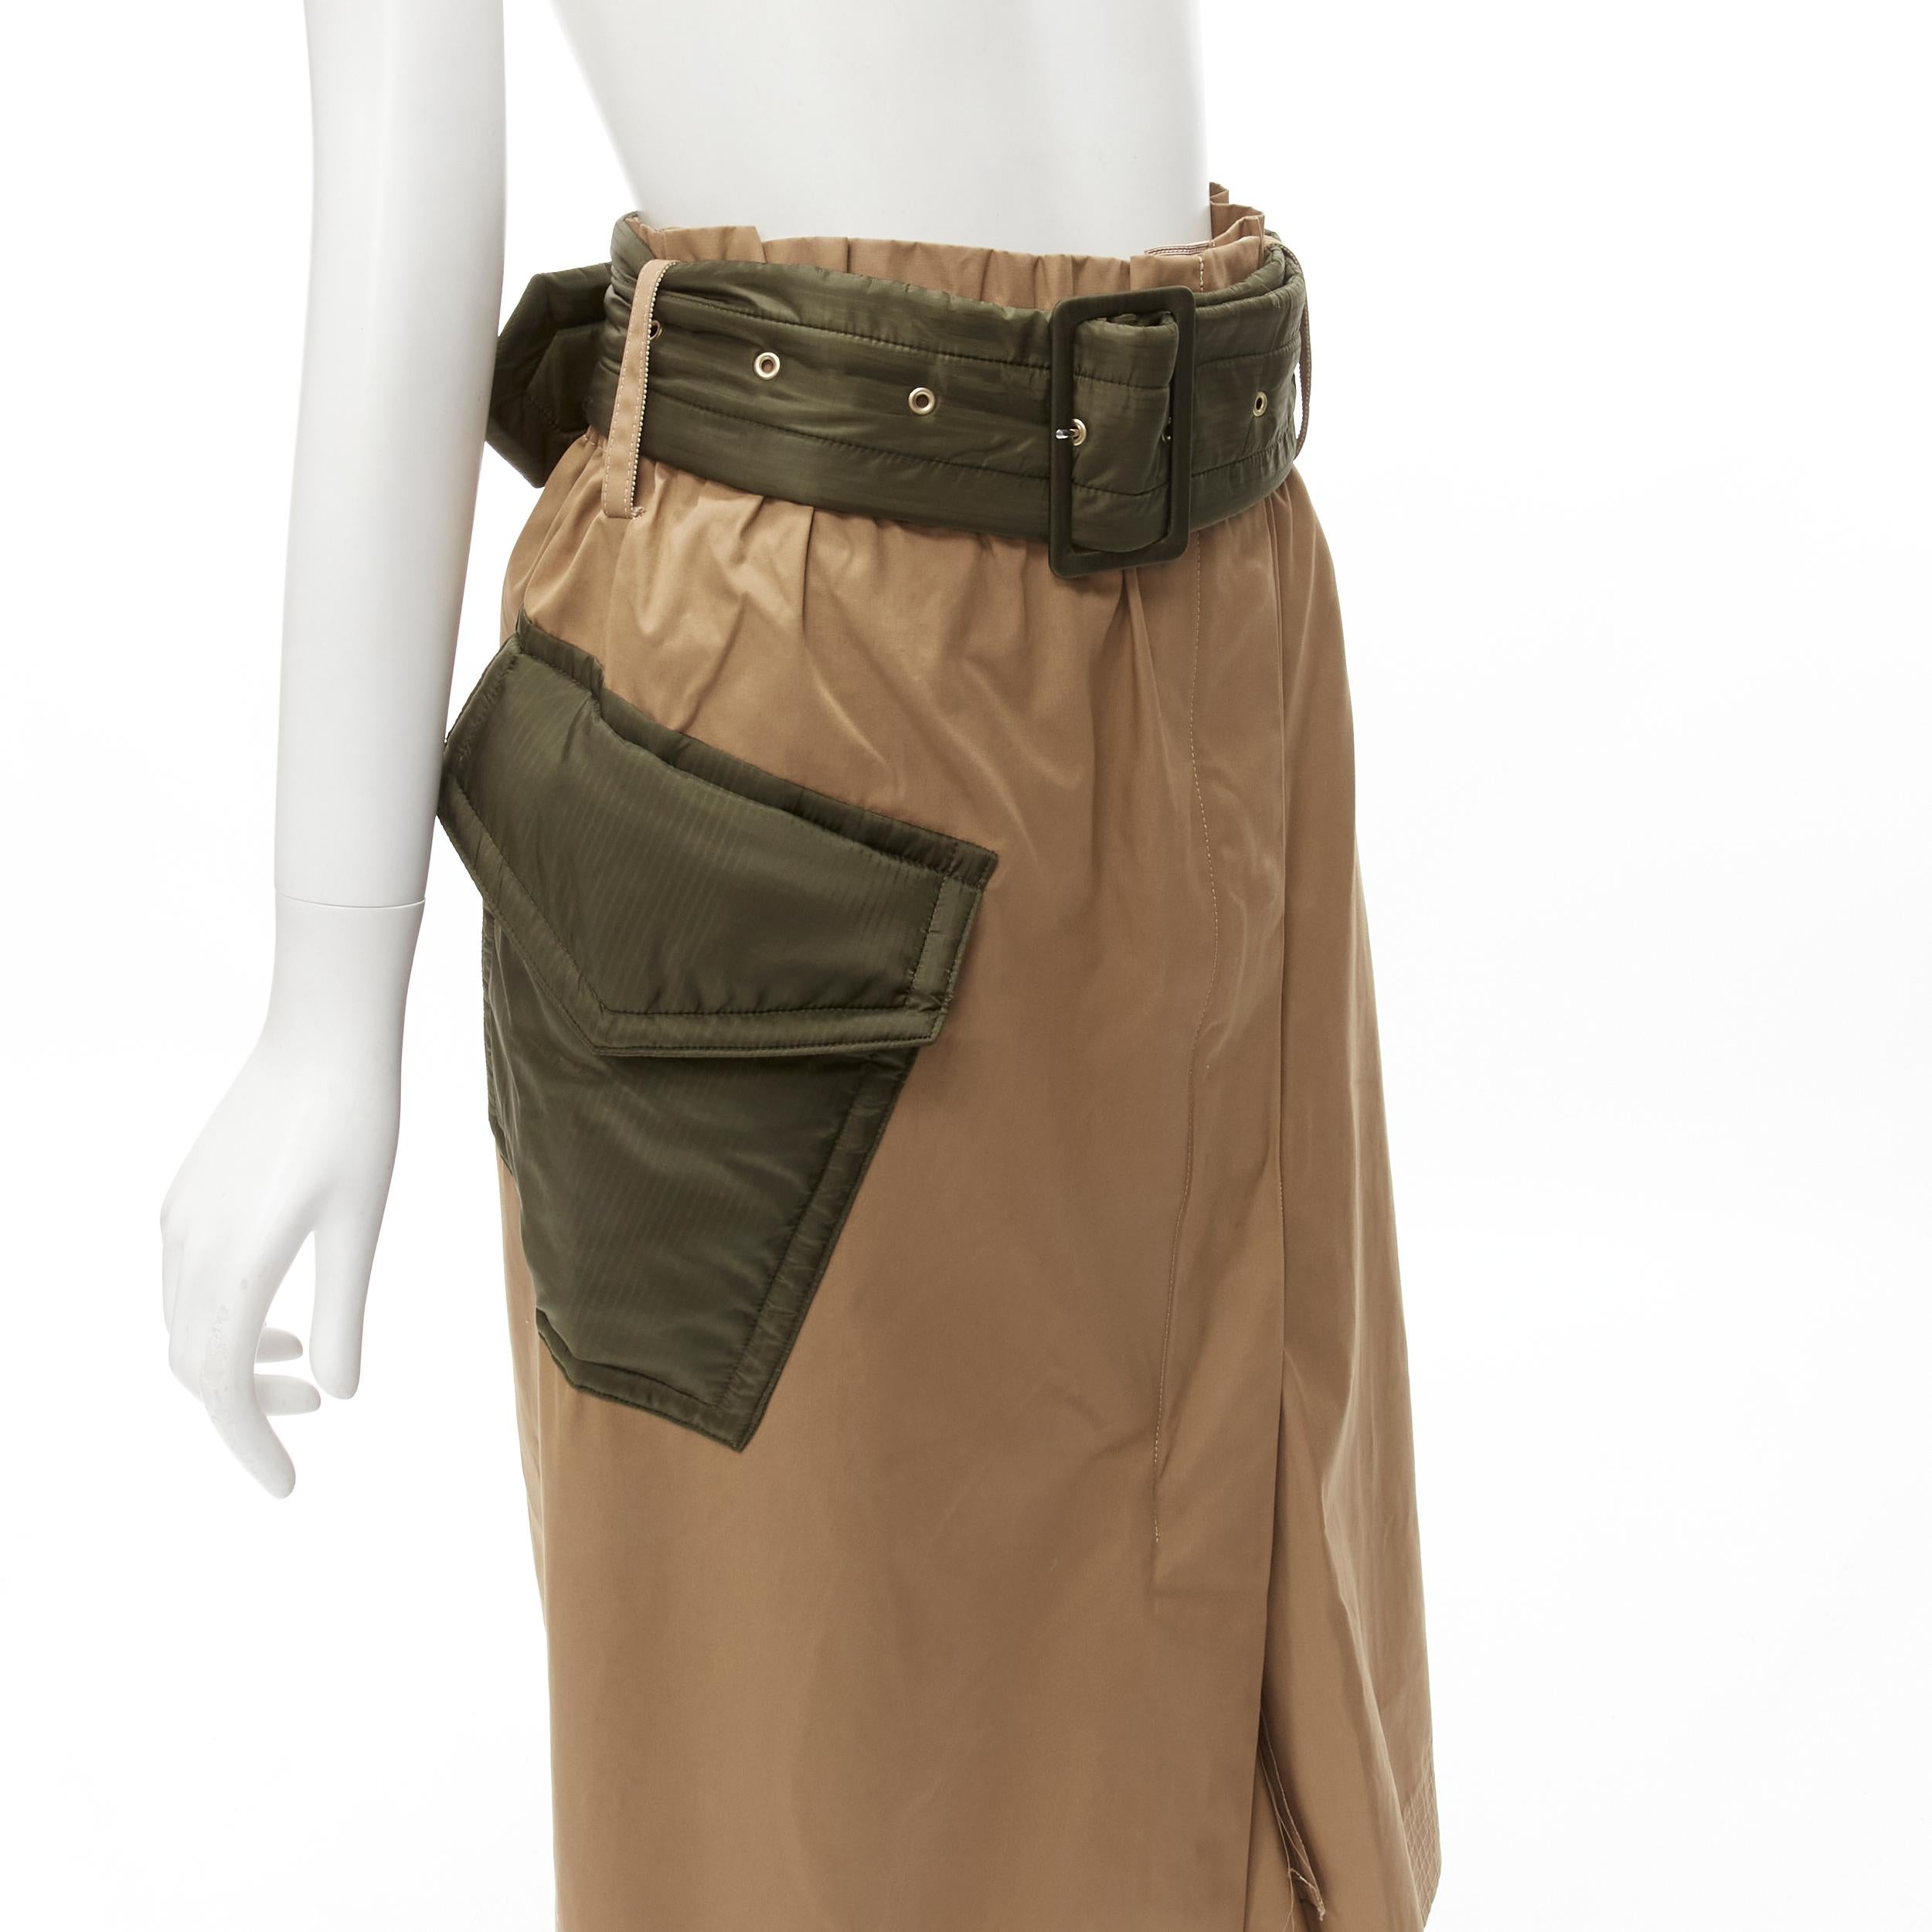 SACAI 2019 khaki brown semi detached hem padded nylon pocket belted skirt JP2 M
Brand: Sacai
Designer: Chitose Abe
Collection: 2019 
Material: Cotton
Color: Tan Brown
Pattern: Solid
Closure: Zip
Extra Detail: Paperbag waist. Concealed heavy duty zip